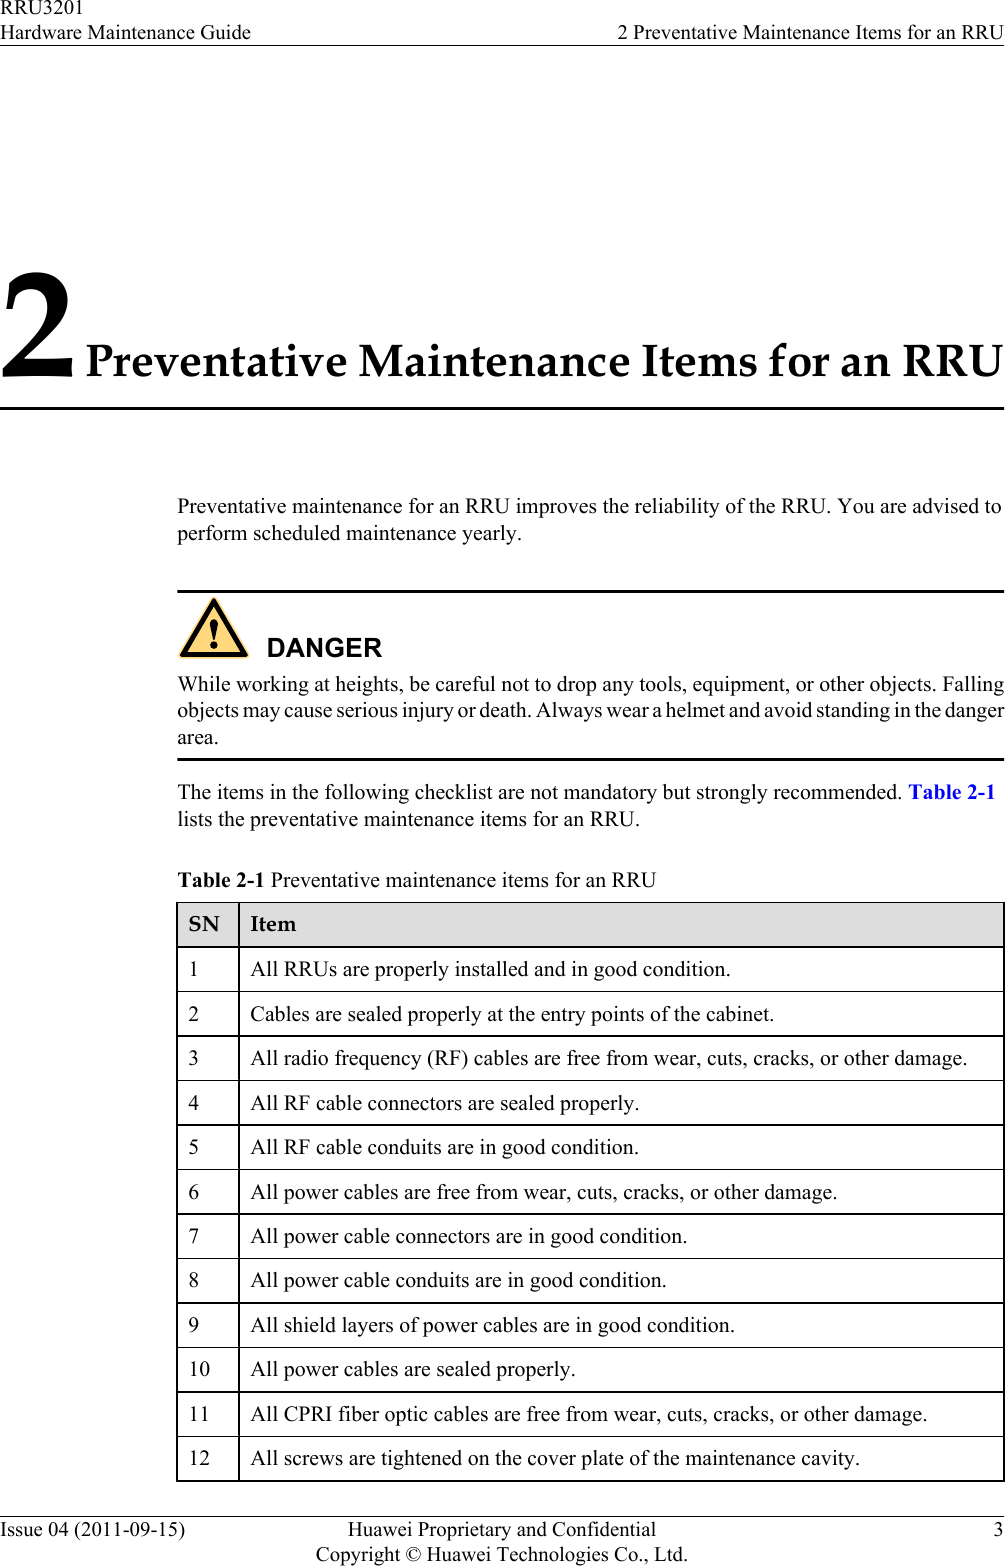 2 Preventative Maintenance Items for an RRUPreventative maintenance for an RRU improves the reliability of the RRU. You are advised toperform scheduled maintenance yearly.DANGERWhile working at heights, be careful not to drop any tools, equipment, or other objects. Fallingobjects may cause serious injury or death. Always wear a helmet and avoid standing in the dangerarea.The items in the following checklist are not mandatory but strongly recommended. Table 2-1lists the preventative maintenance items for an RRU.Table 2-1 Preventative maintenance items for an RRUSN Item1All RRUs are properly installed and in good condition.2 Cables are sealed properly at the entry points of the cabinet.3 All radio frequency (RF) cables are free from wear, cuts, cracks, or other damage.4 All RF cable connectors are sealed properly.5 All RF cable conduits are in good condition.6 All power cables are free from wear, cuts, cracks, or other damage.7 All power cable connectors are in good condition.8 All power cable conduits are in good condition.9 All shield layers of power cables are in good condition.10 All power cables are sealed properly.11 All CPRI fiber optic cables are free from wear, cuts, cracks, or other damage.12 All screws are tightened on the cover plate of the maintenance cavity.RRU3201Hardware Maintenance Guide 2 Preventative Maintenance Items for an RRUIssue 04 (2011-09-15) Huawei Proprietary and ConfidentialCopyright © Huawei Technologies Co., Ltd.3